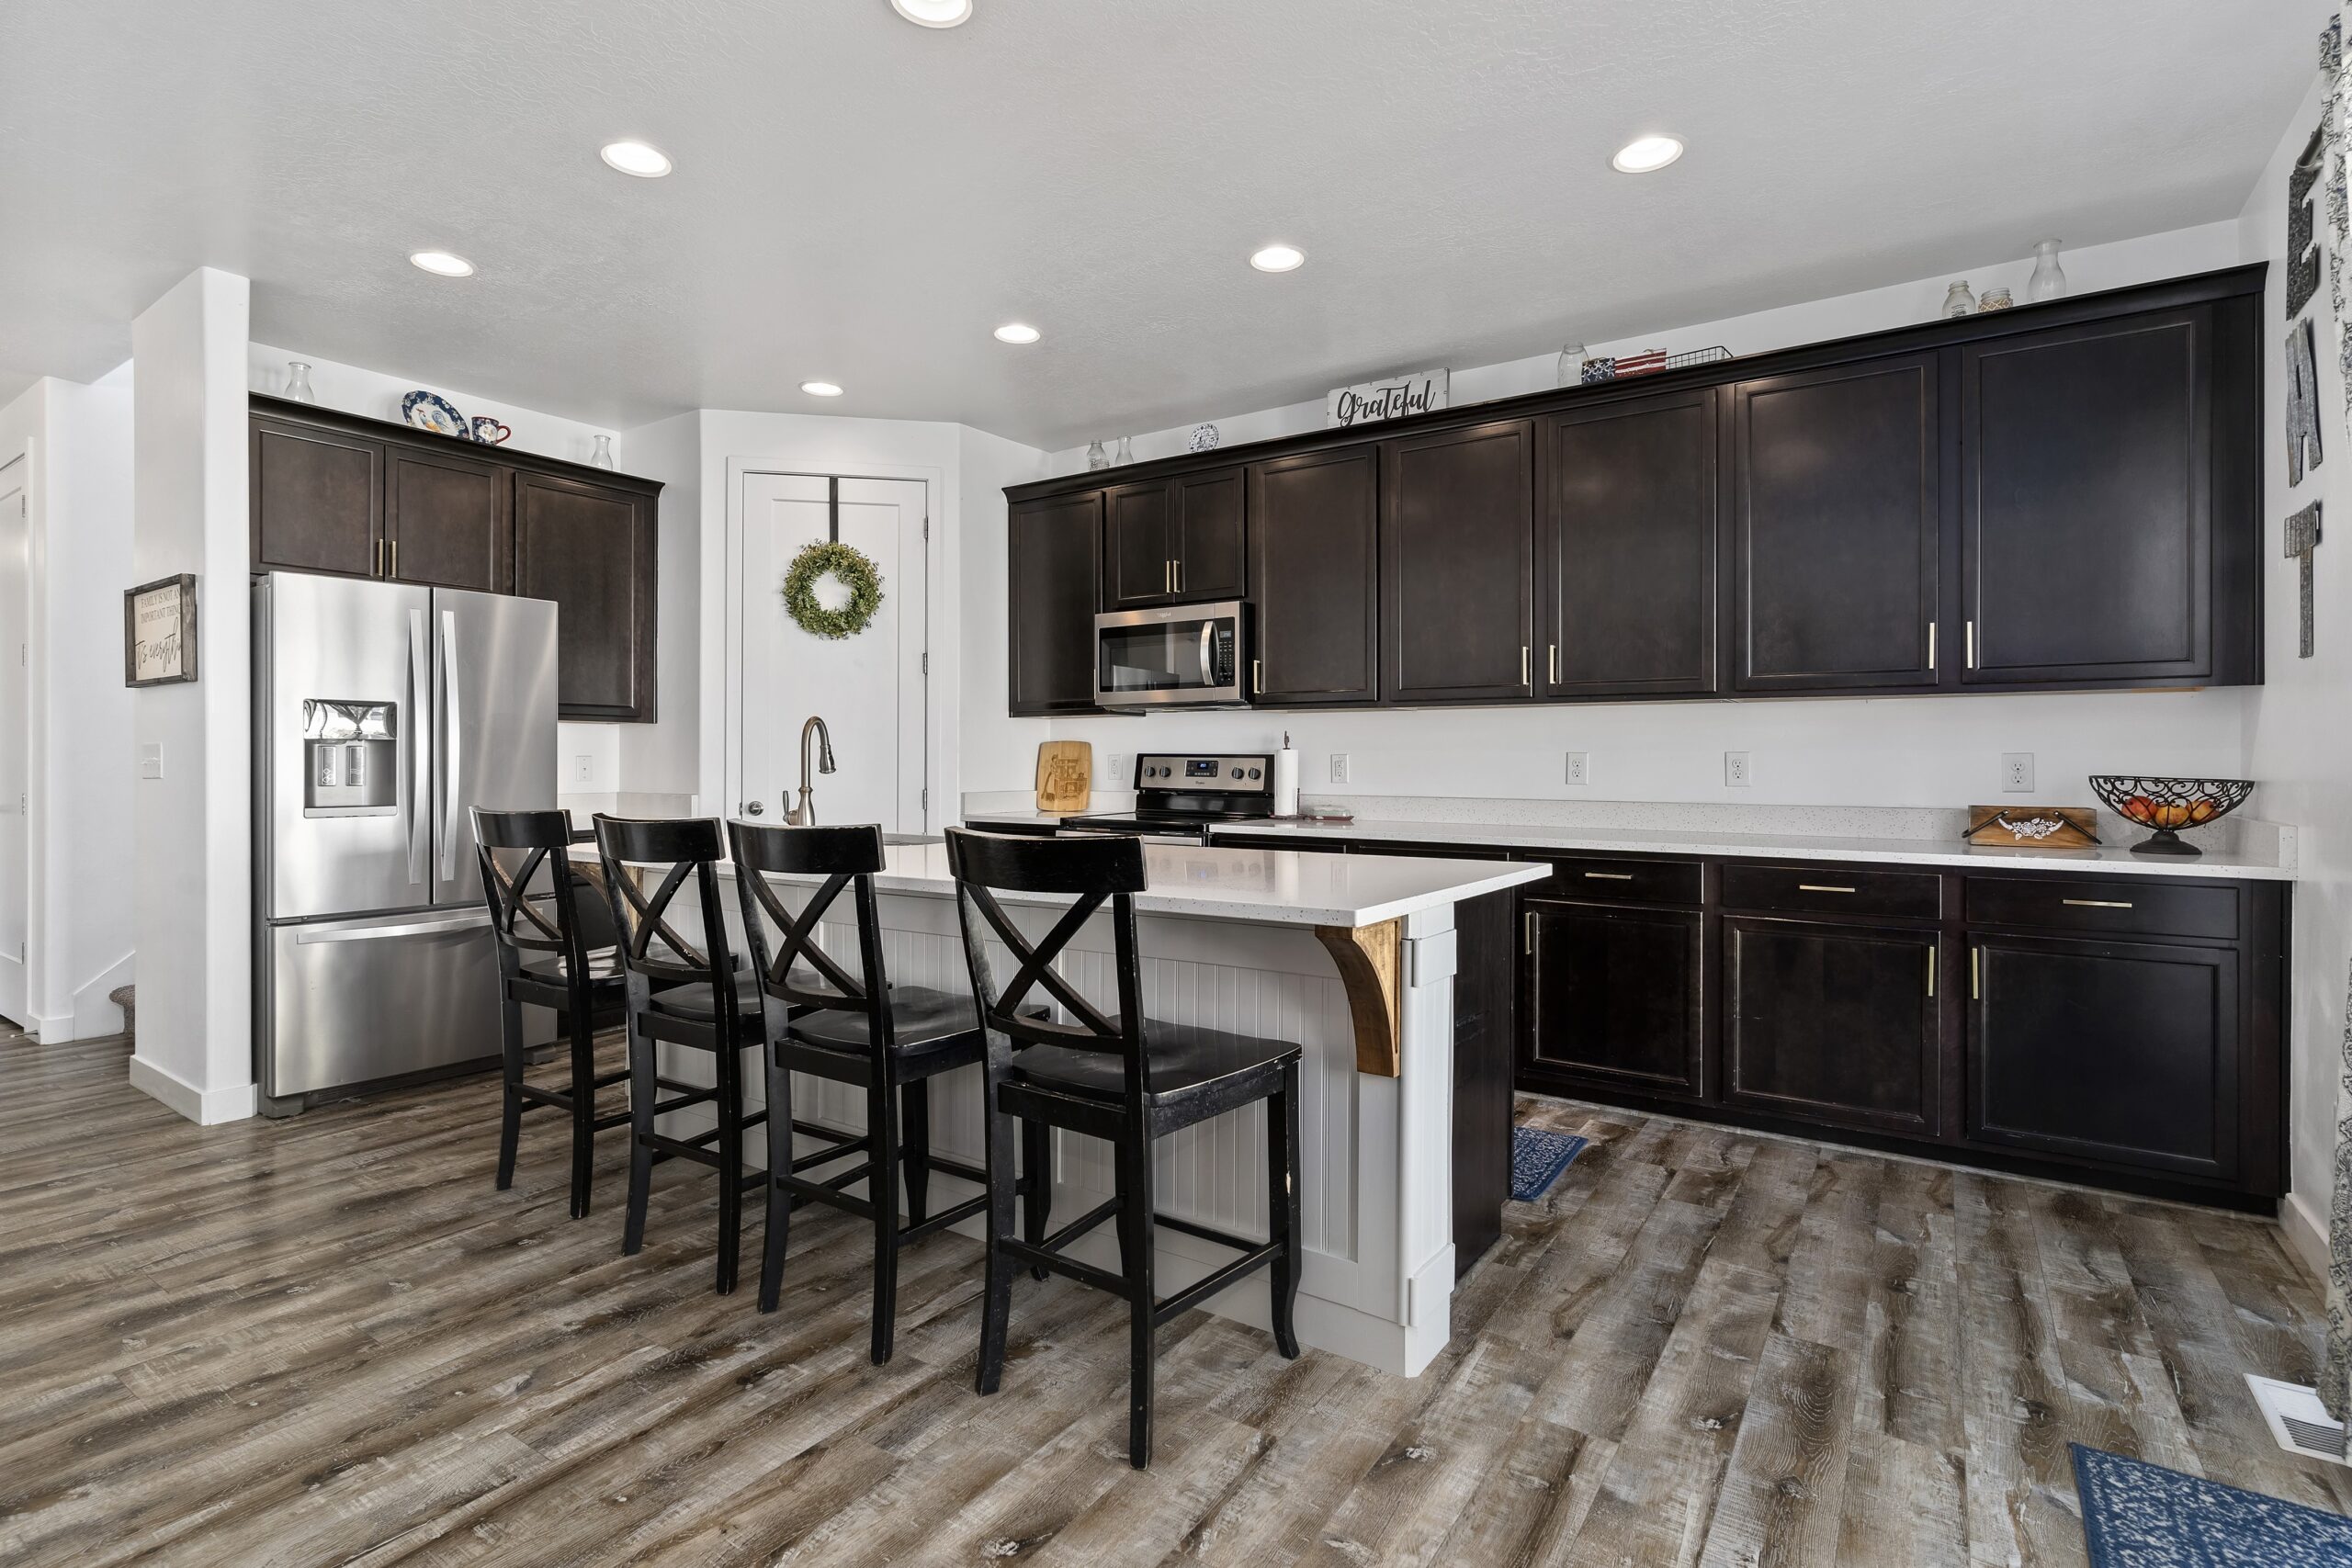 Modern kitchen of a Home for Sale in Layton Utah featuring lots of cabinetry and large kitchen island...